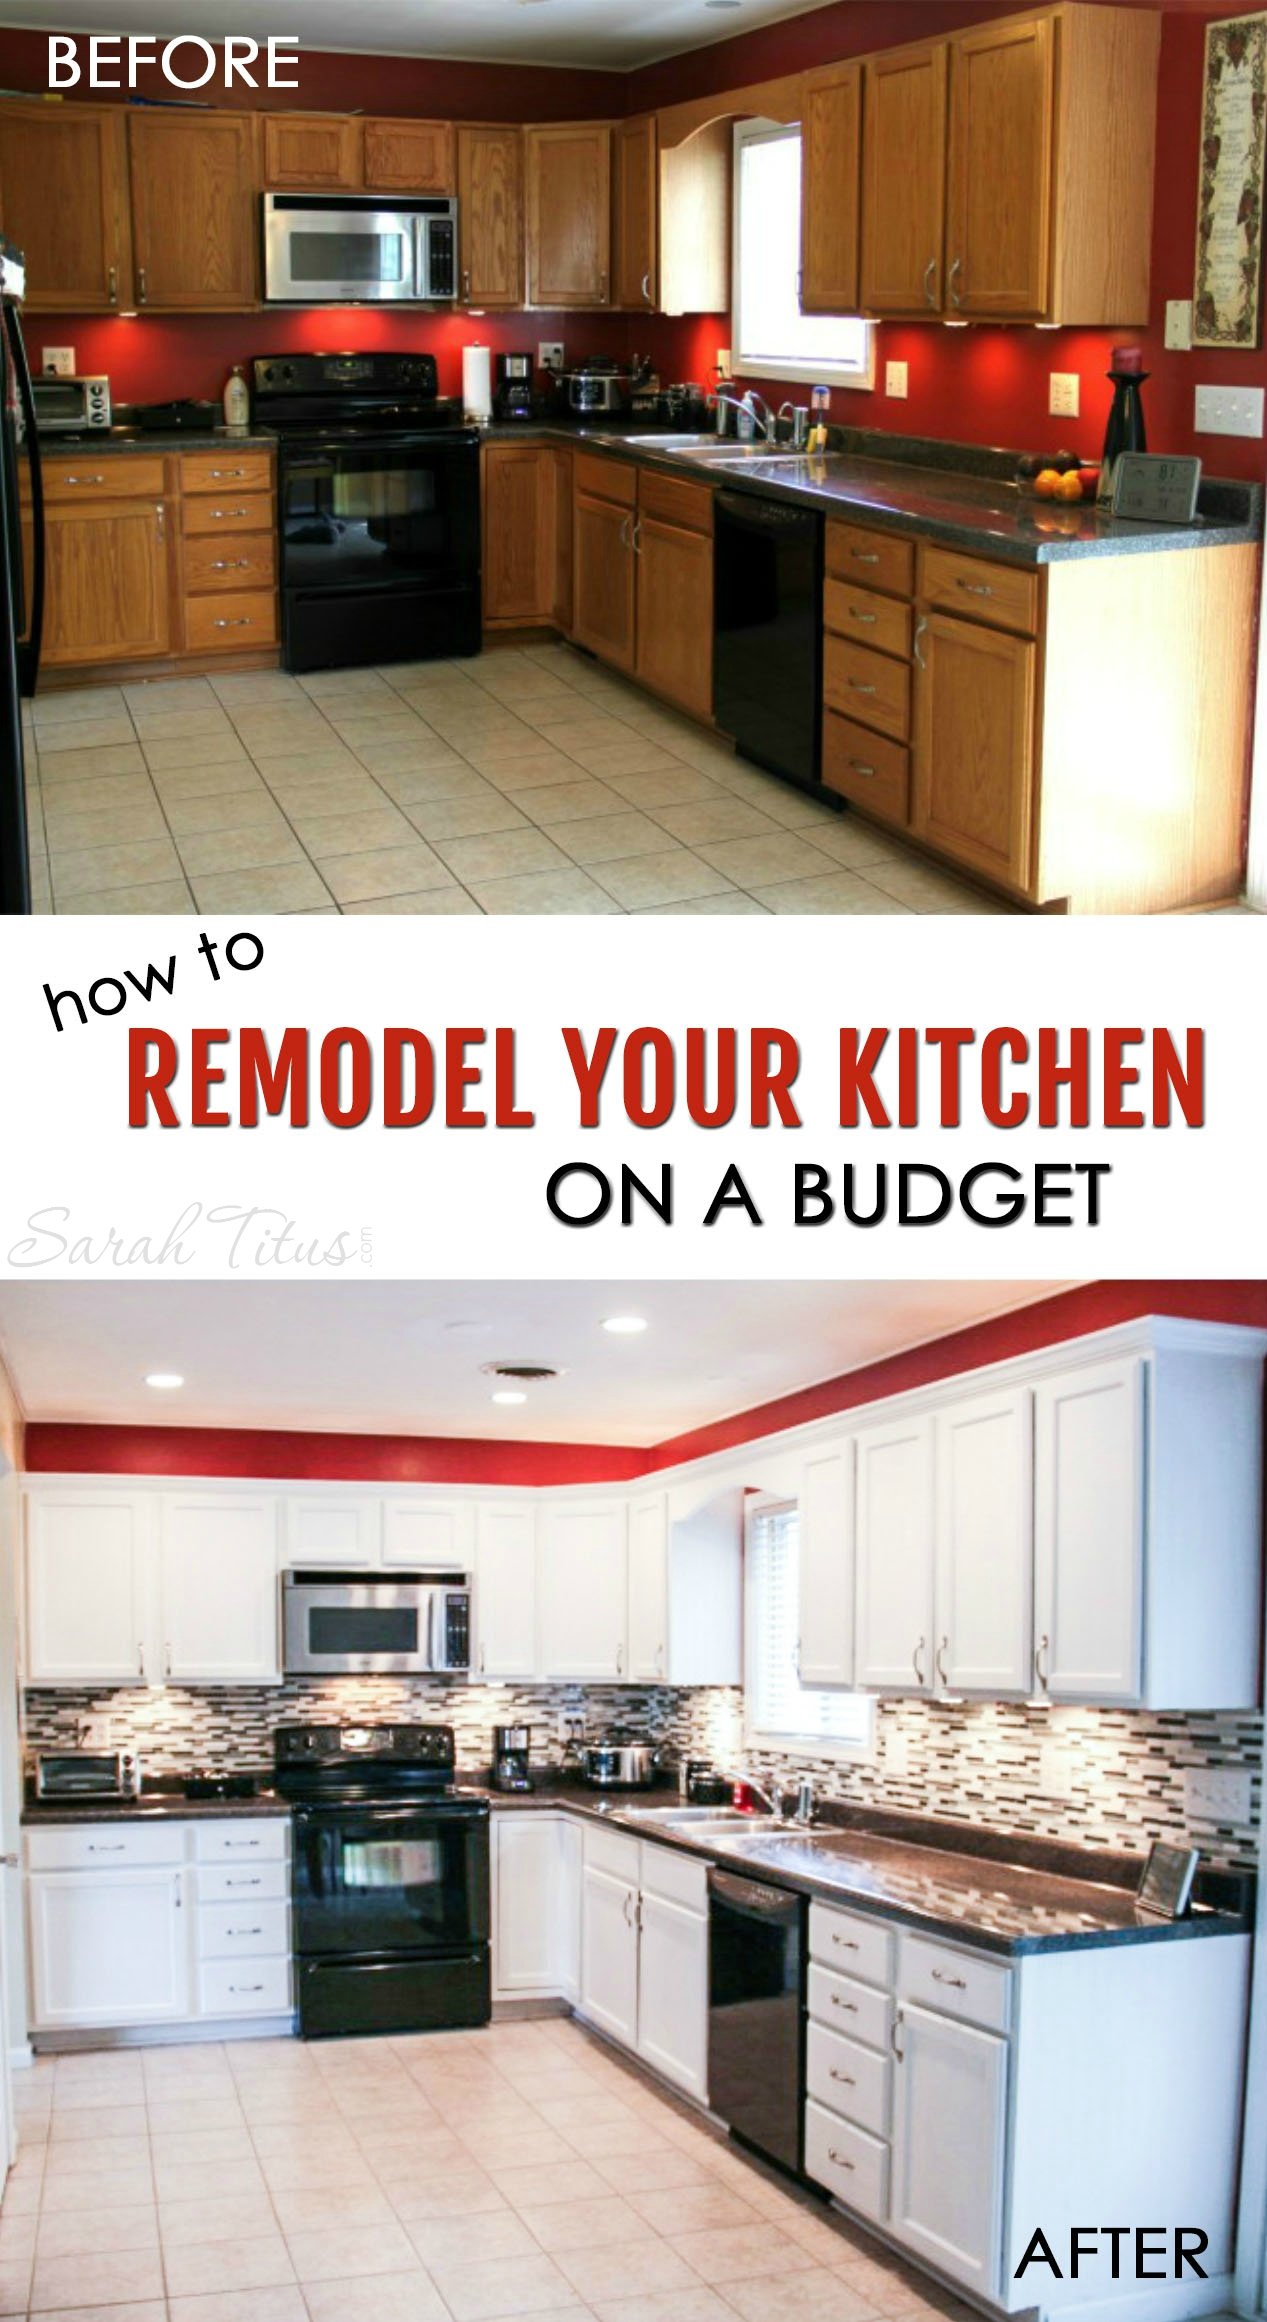 How to renovate kitchen on a budget